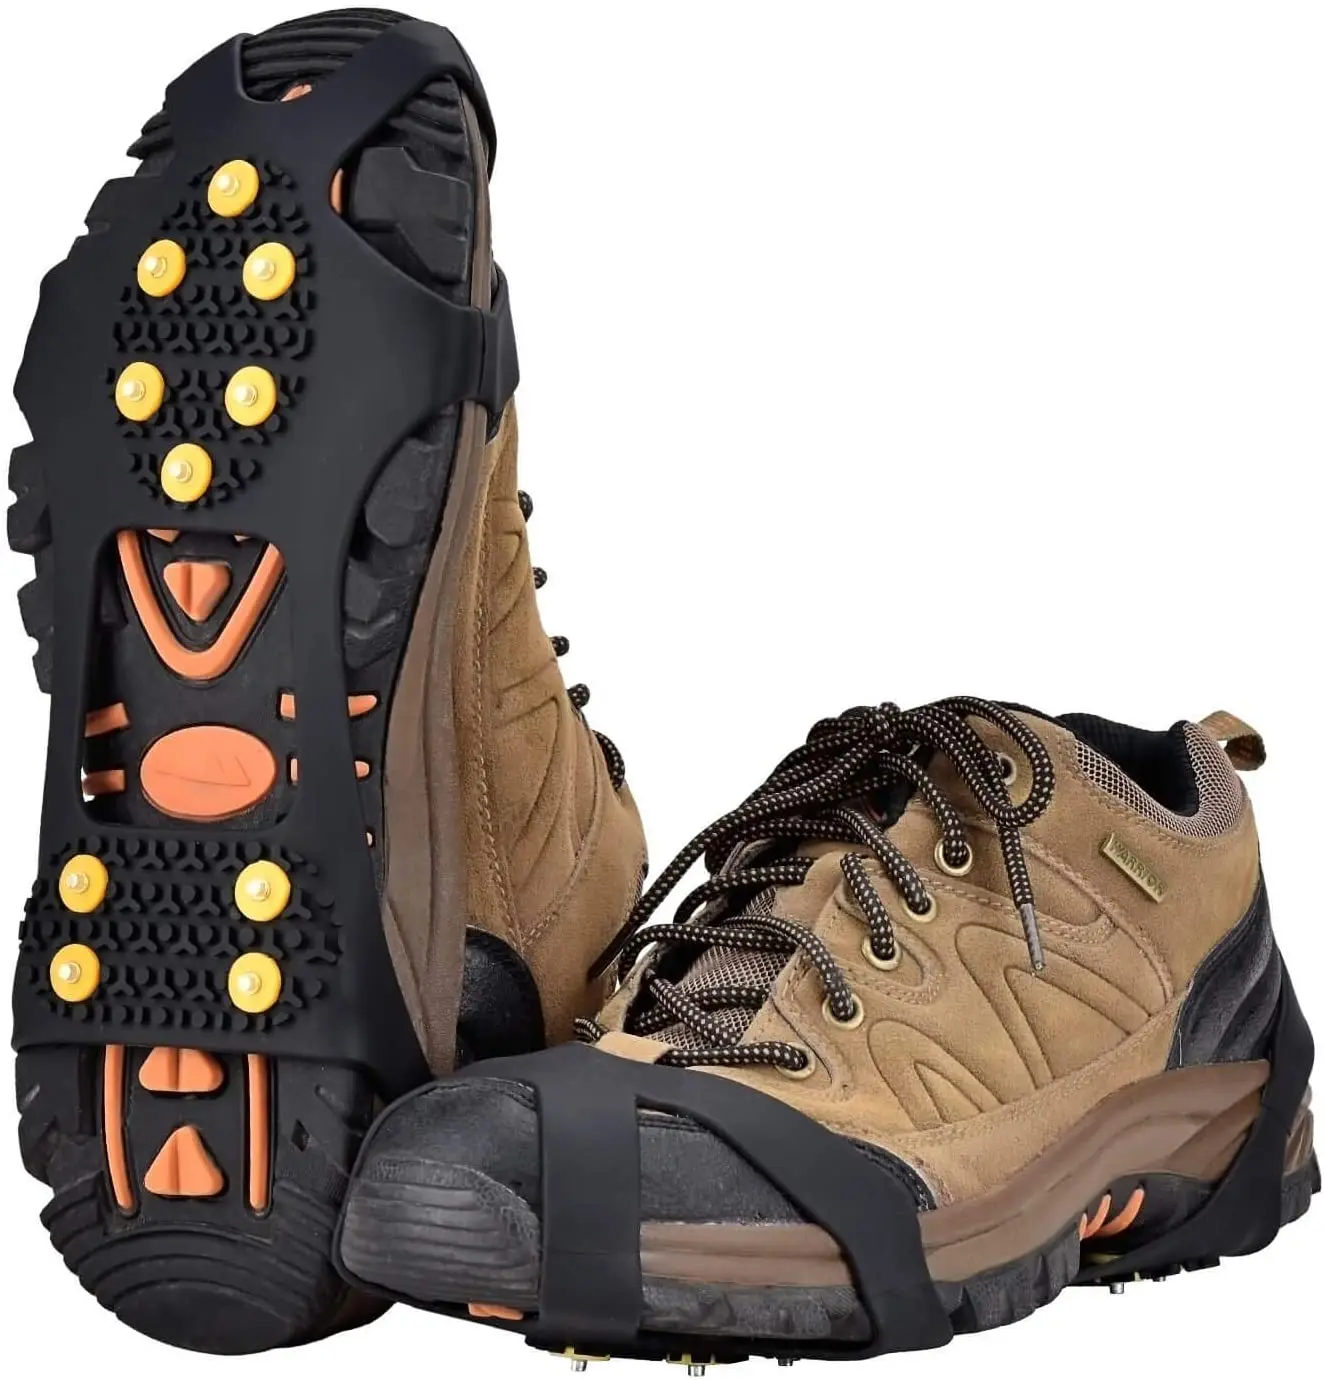 Climbing and Hiking Jogging TraderPlus Ice Snow Shoes Grips Traction Cleats Over Boots with 10 Steel Studs Crampons for Walking 